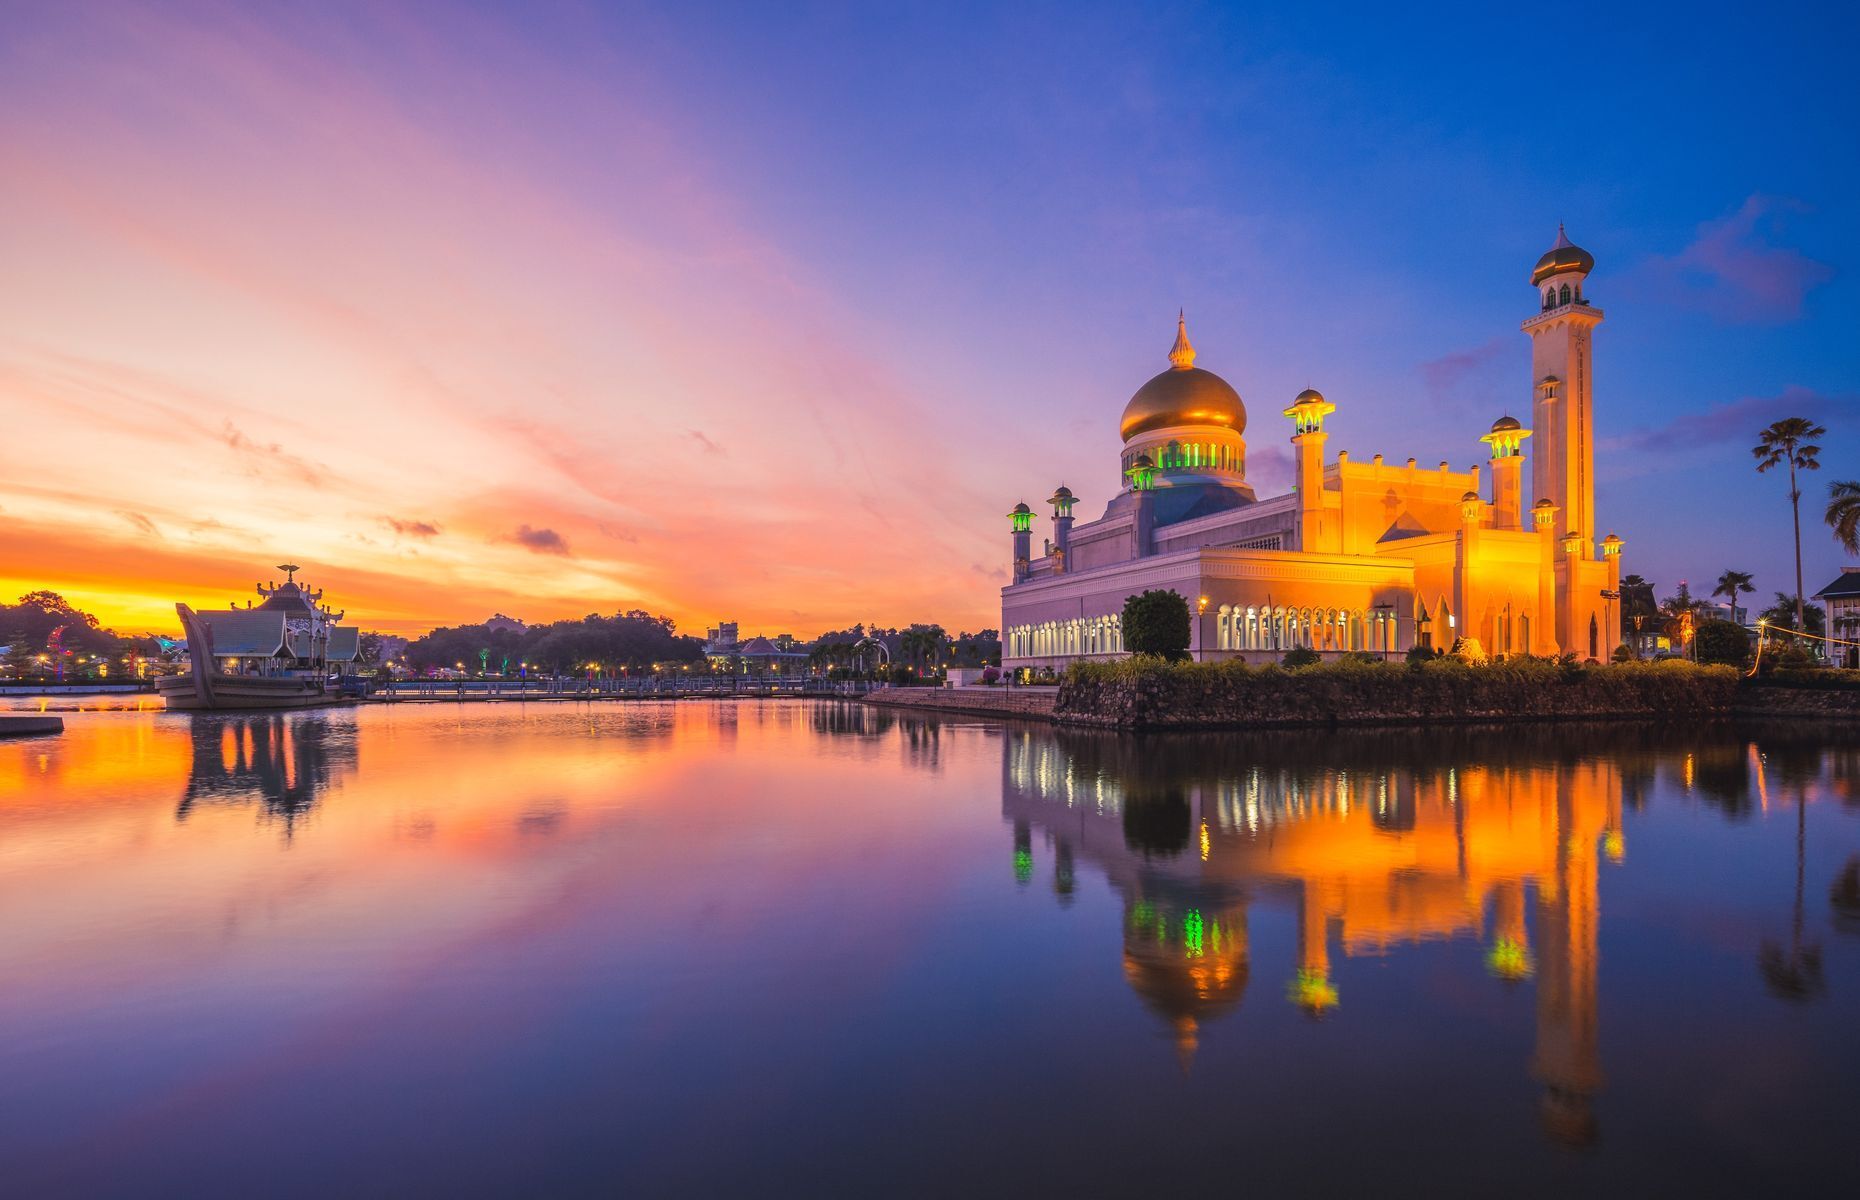 A true work of architectural art, the <a href="https://www.visitsoutheastasia.travel/top-sights/sultan-omar-ali-saifuddien-mosque/" rel="noreferrer noopener">Omar Ali Saifuddien Mosque</a> graces the heart of Brunei’s capital Bandar Seri Begawan. A symbol of elegance and the country’s Islamic faith, the mosque will leave you breathless with its magnificent golden dome, slender minarets, and opulent gardens. Non-Muslims can now go inside, but silence is mandatory, photos are forbidden, and shoes must be removed before entering.